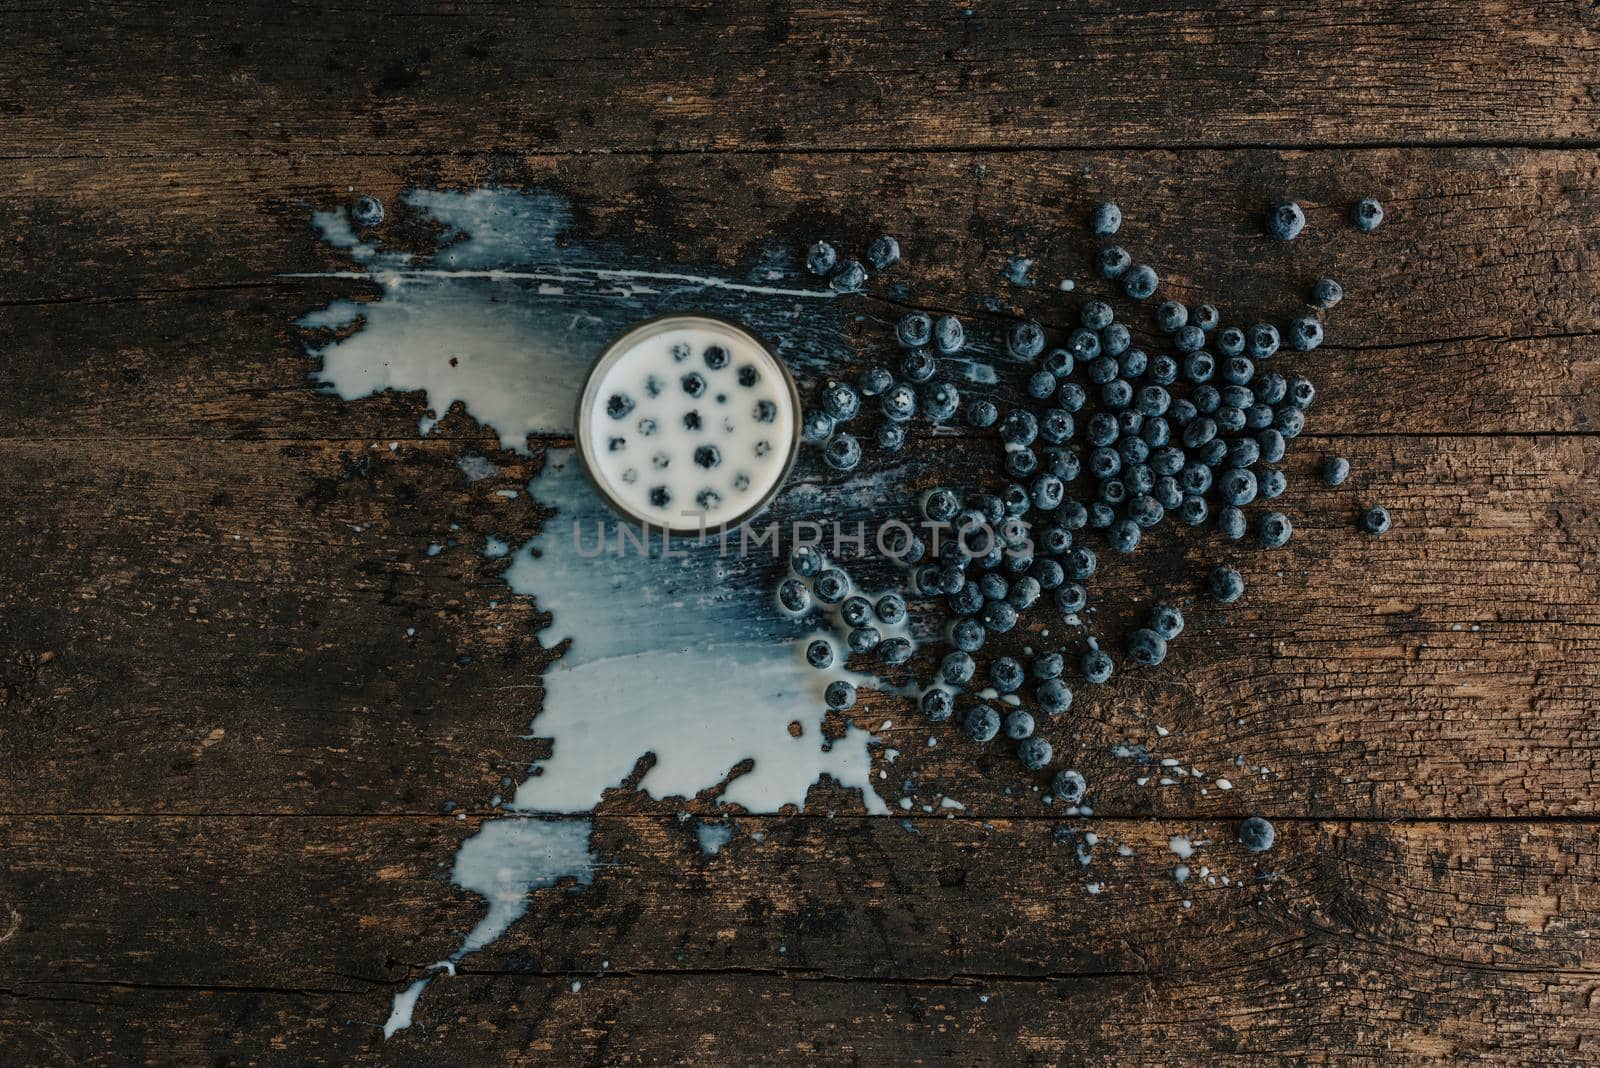 Berries are thrown into the transparent glass making splashes of milk by AndriiDrachuk